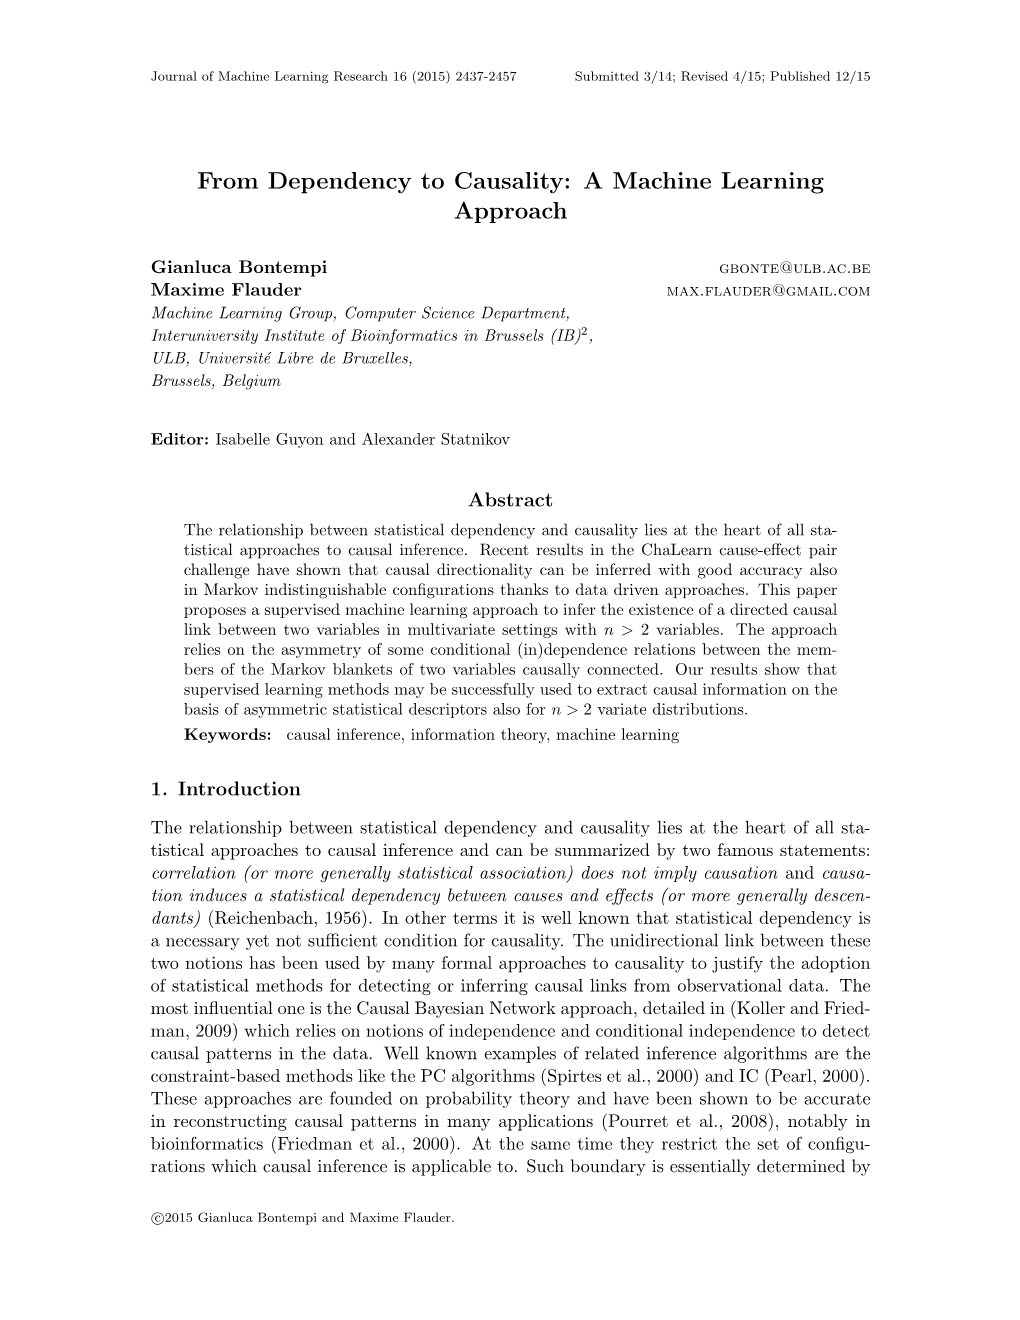 From Dependency to Causality: a Machine Learning Approach